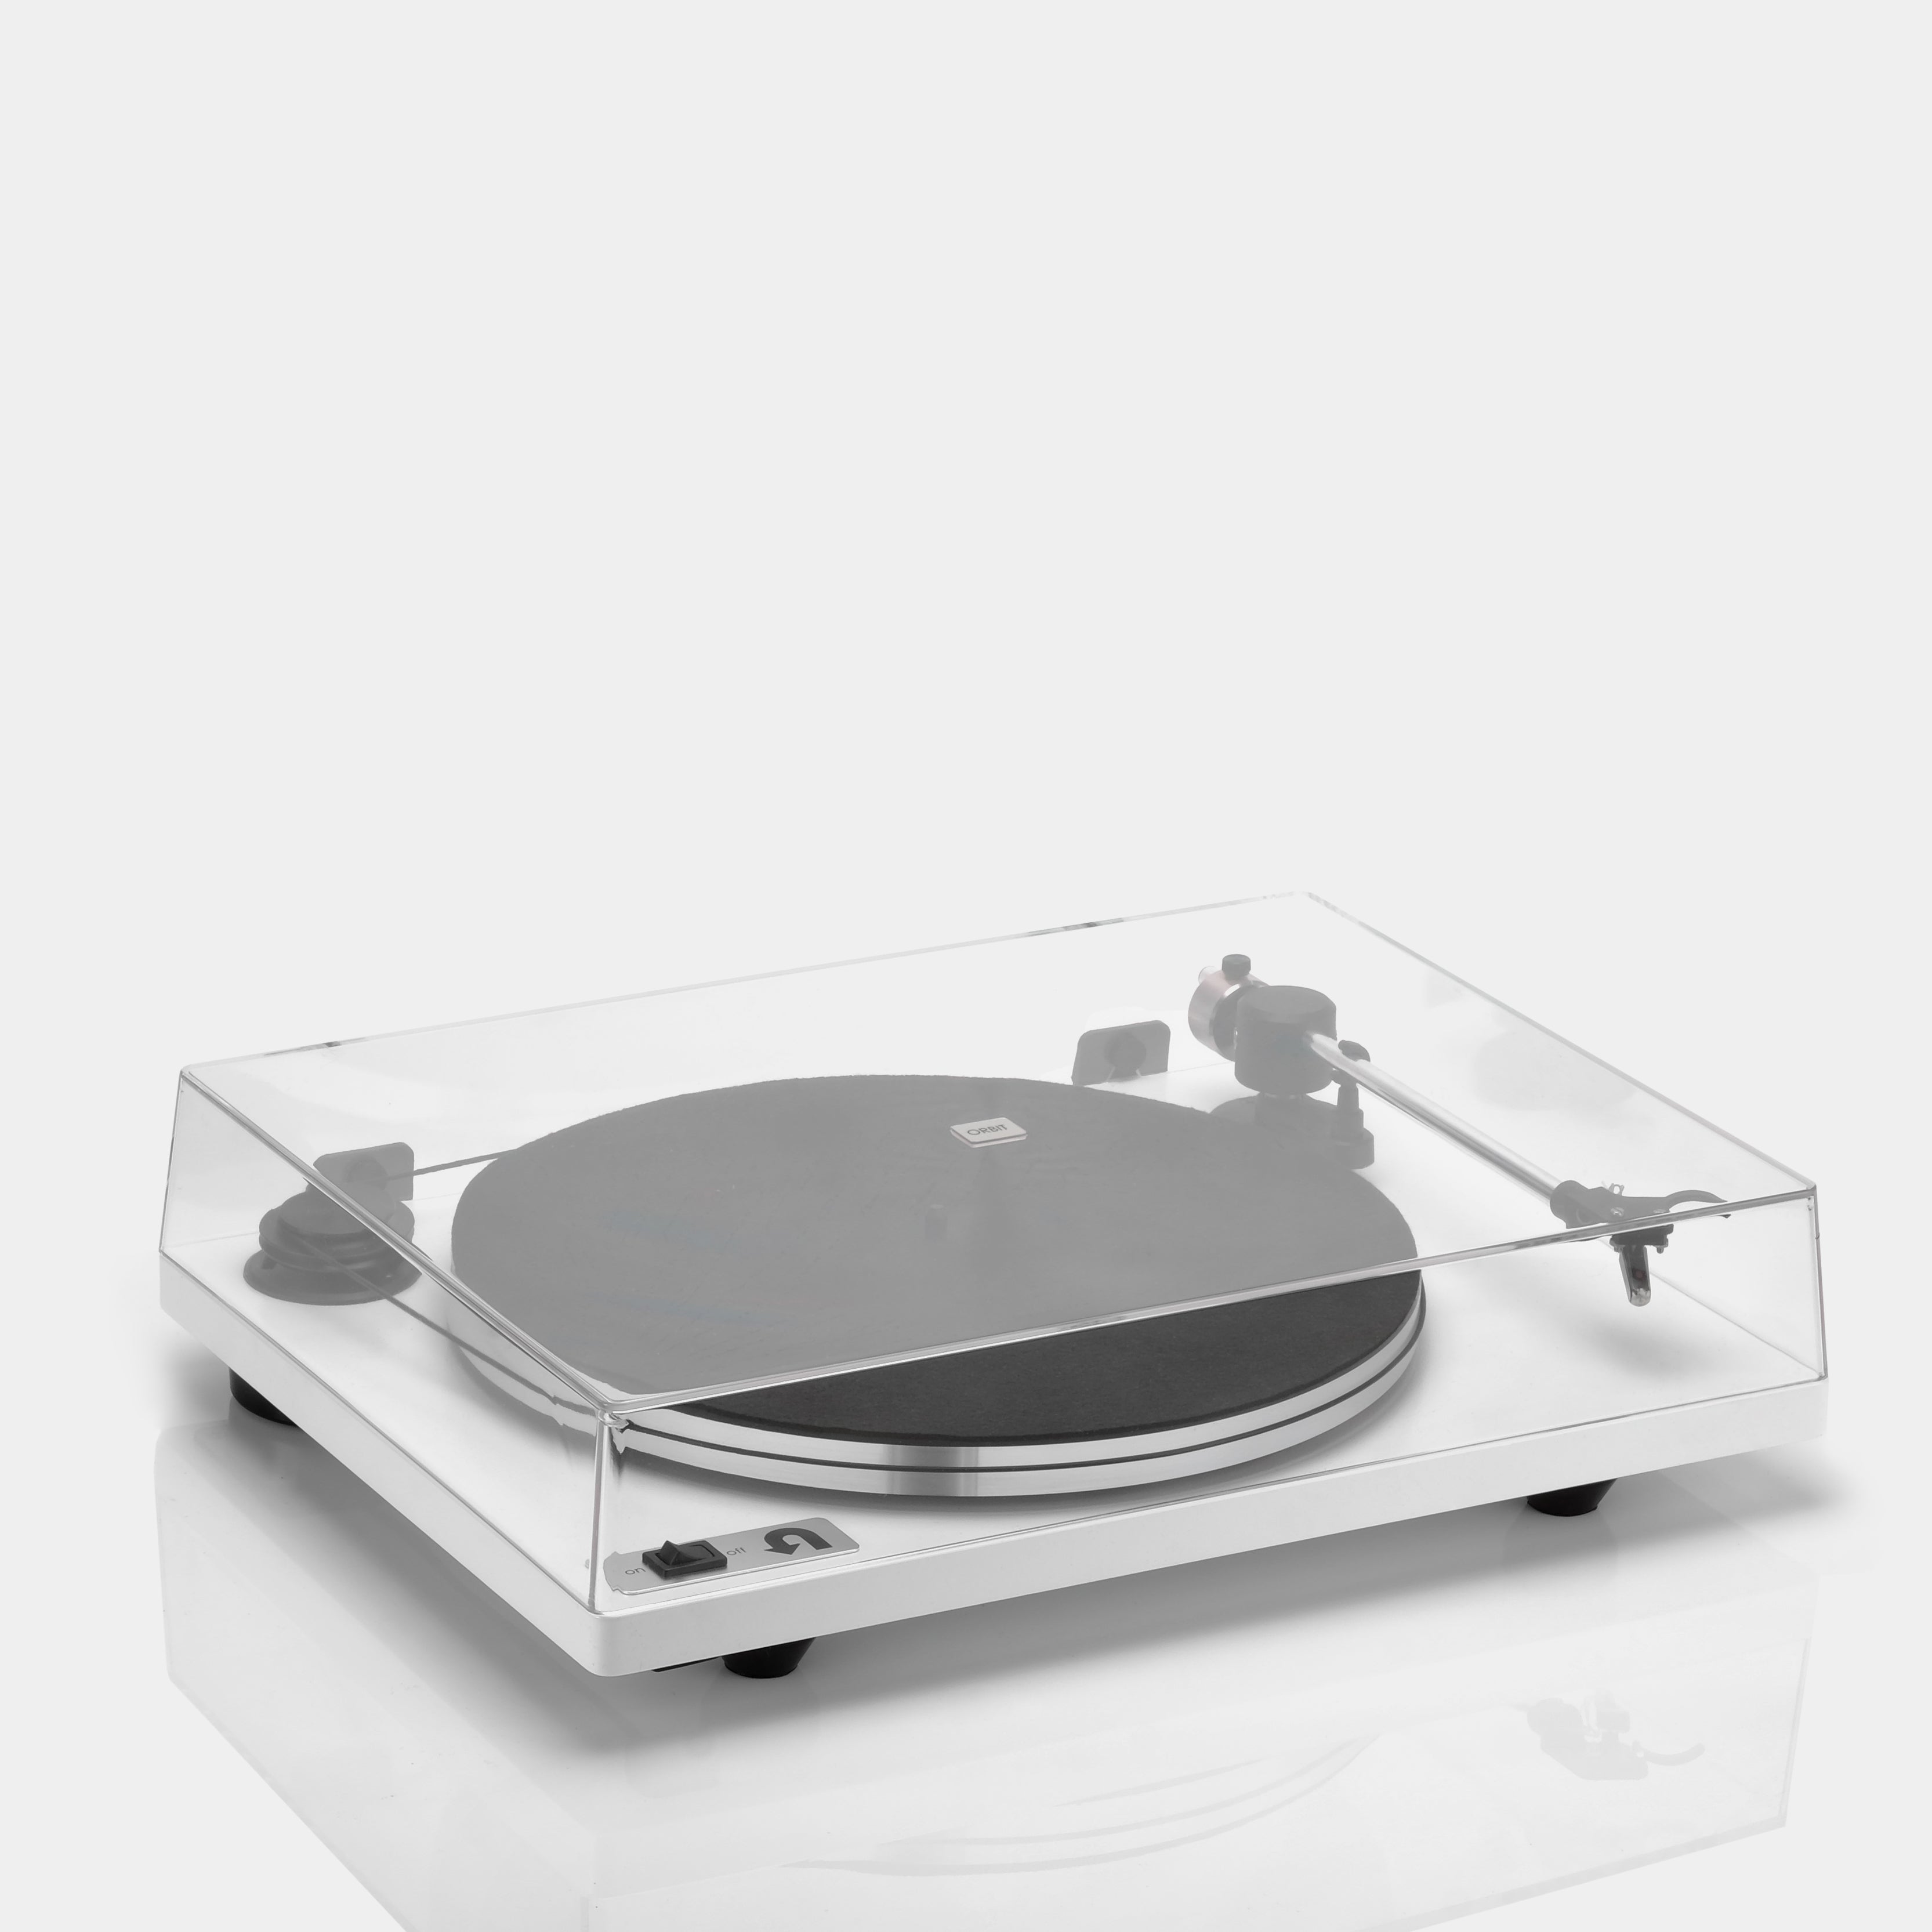 Orbit Plus White Turntable with Built-in Preamp by U-Turn Audio